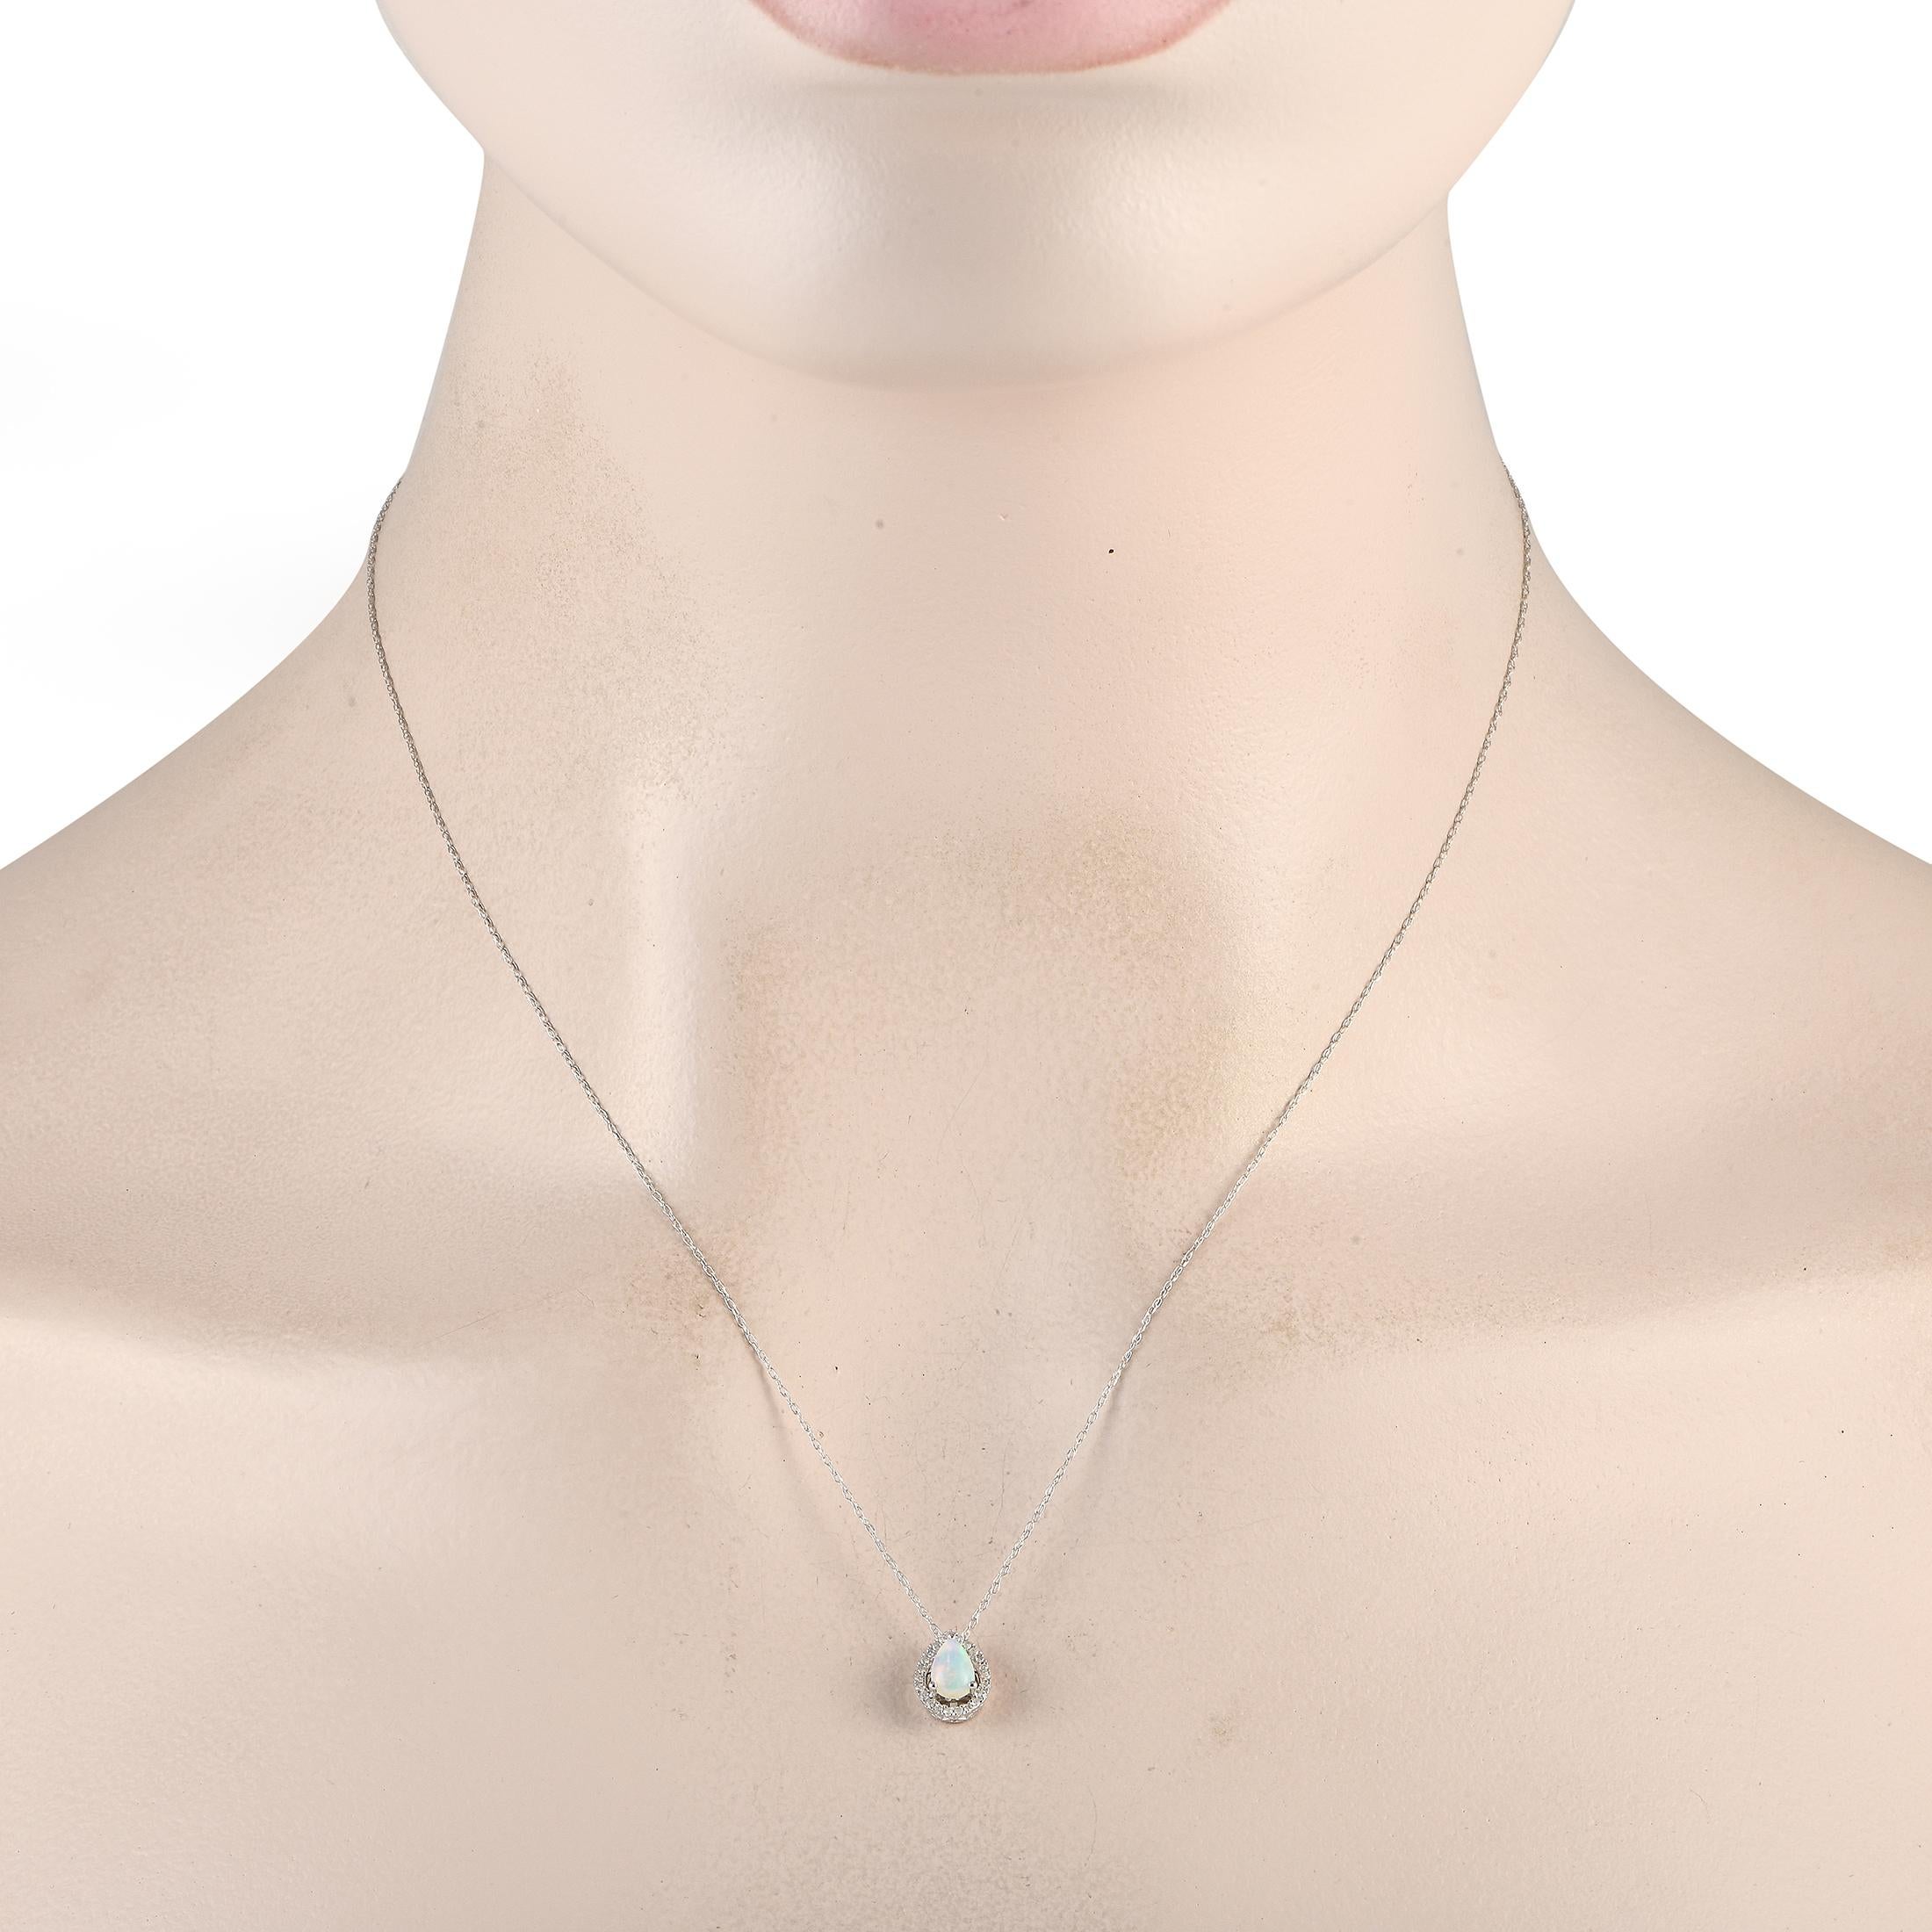 A radiant opal gemstone shines to life at the center of this necklaces stunning 14K white gold pendant. Suspended from an 18 chain, the pendant measures 1.25 long by 0.25 wide and comes to life thanks to 0.05 carats of sparkling diamond accents.This